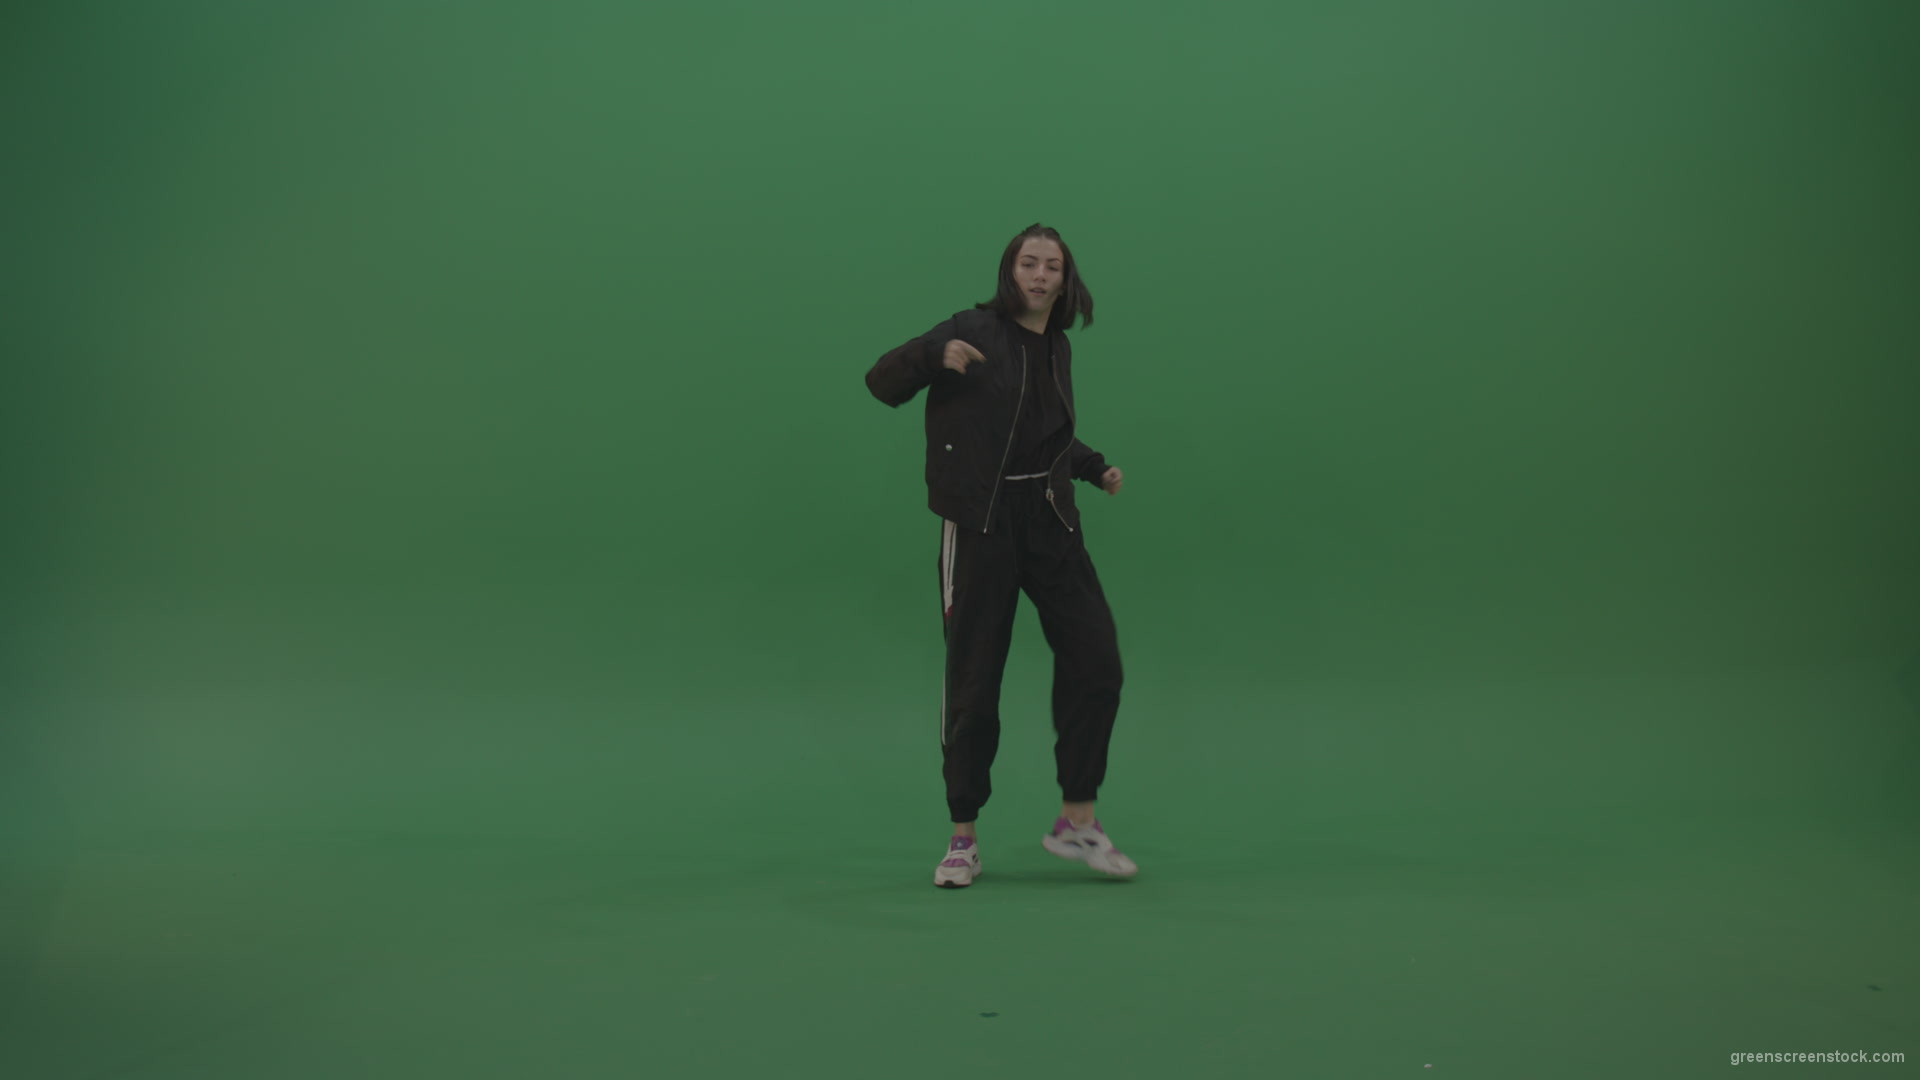 Incredible_Dance_Hip_Hop_Moves_From_Young_Brunette_Female_Wearing_Black_Sweat_Suite_And_White_Trainers_On_Green_Screen_Wall_Background_006 Green Screen Stock